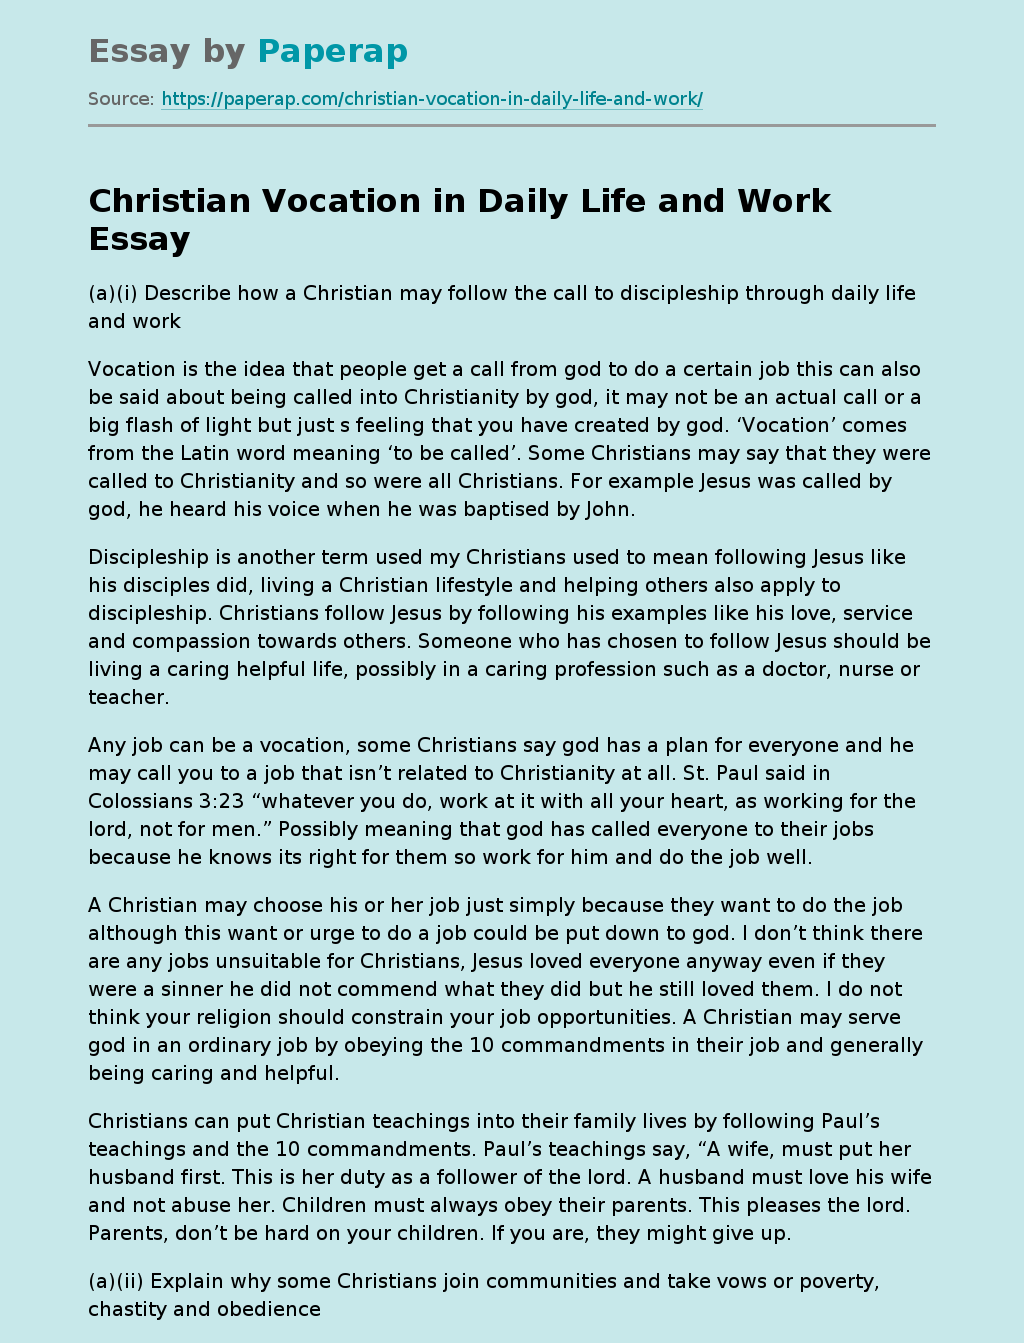 Christian Vocation in Daily Life and Work